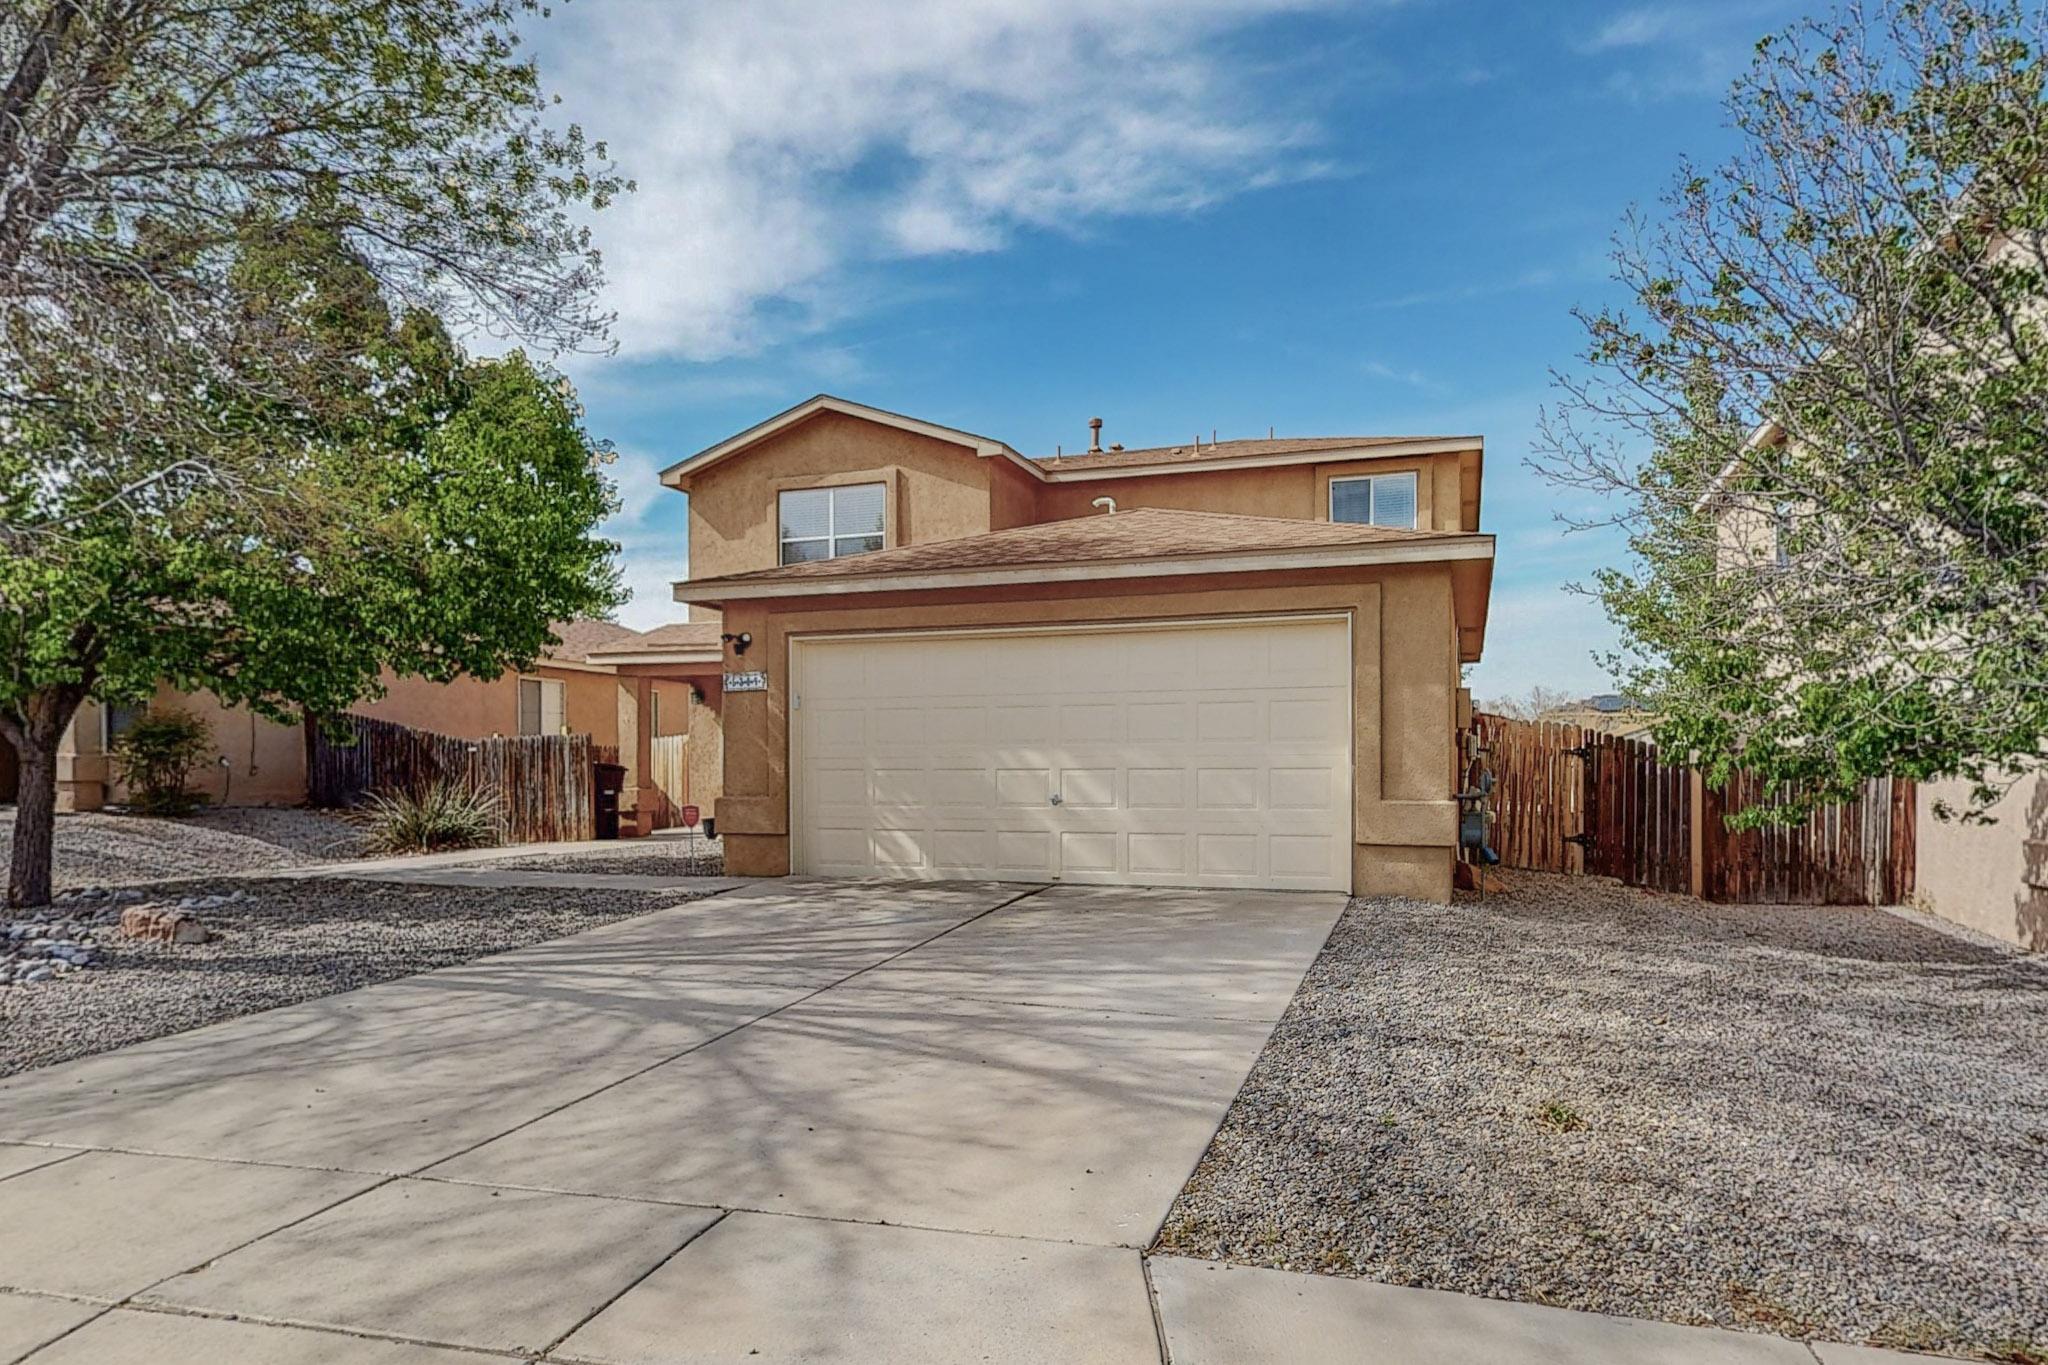 Welcome to the sought out Stonebridge subdivision.  This well cared for family home offers 4 bedrooms, 3 baths. 2 living areas, and a loft upstairs.  All appliances convey plus shed and outside grill.  HOA includes walking paths,  community pool, club house and park.  Near hospital, restaurants, shopping and Rio Rancho.